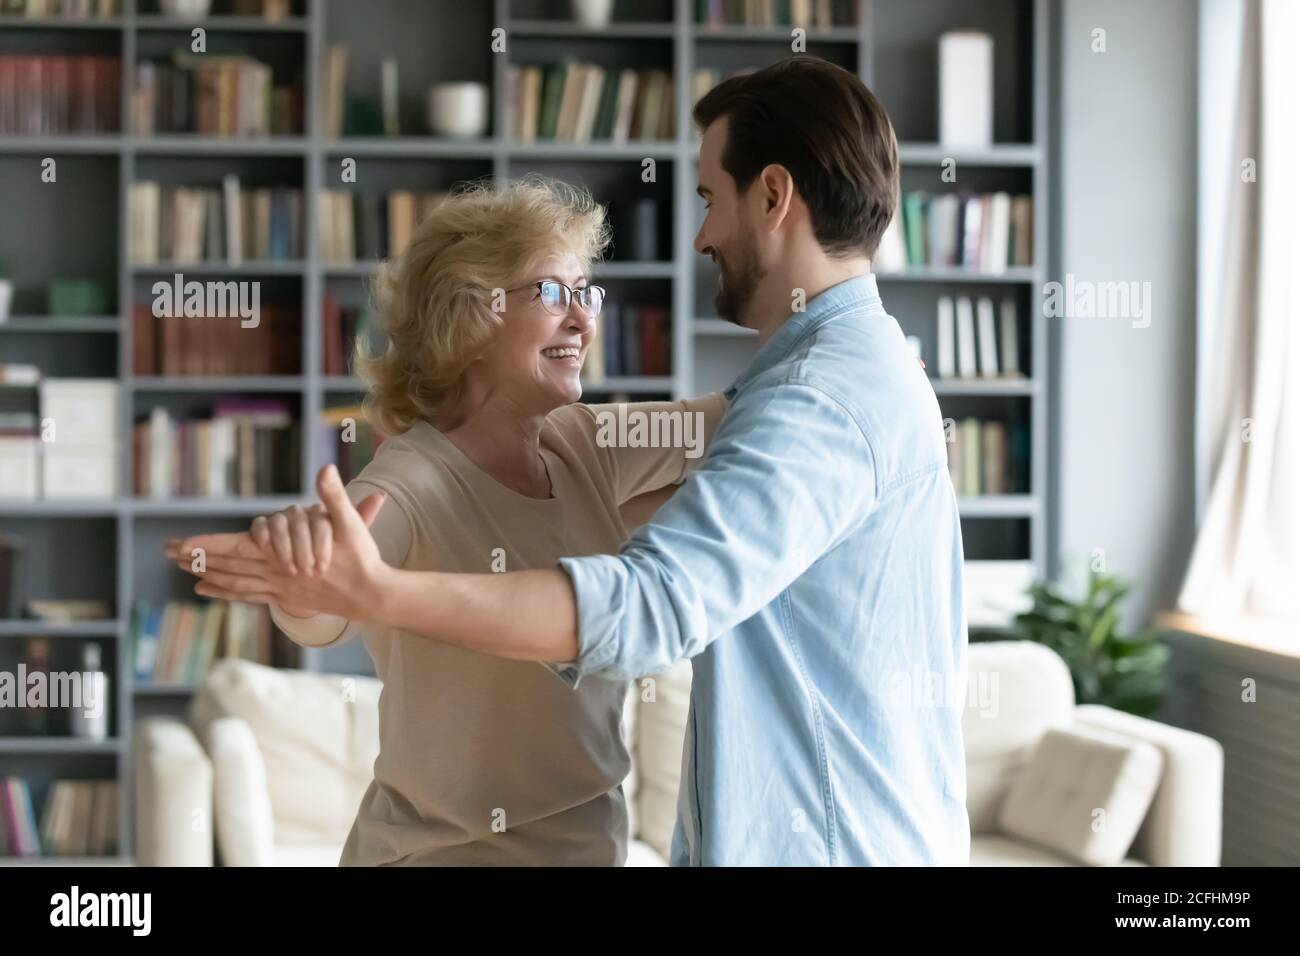 Smiling mature woman dancing with adult son in living room Stock Photo